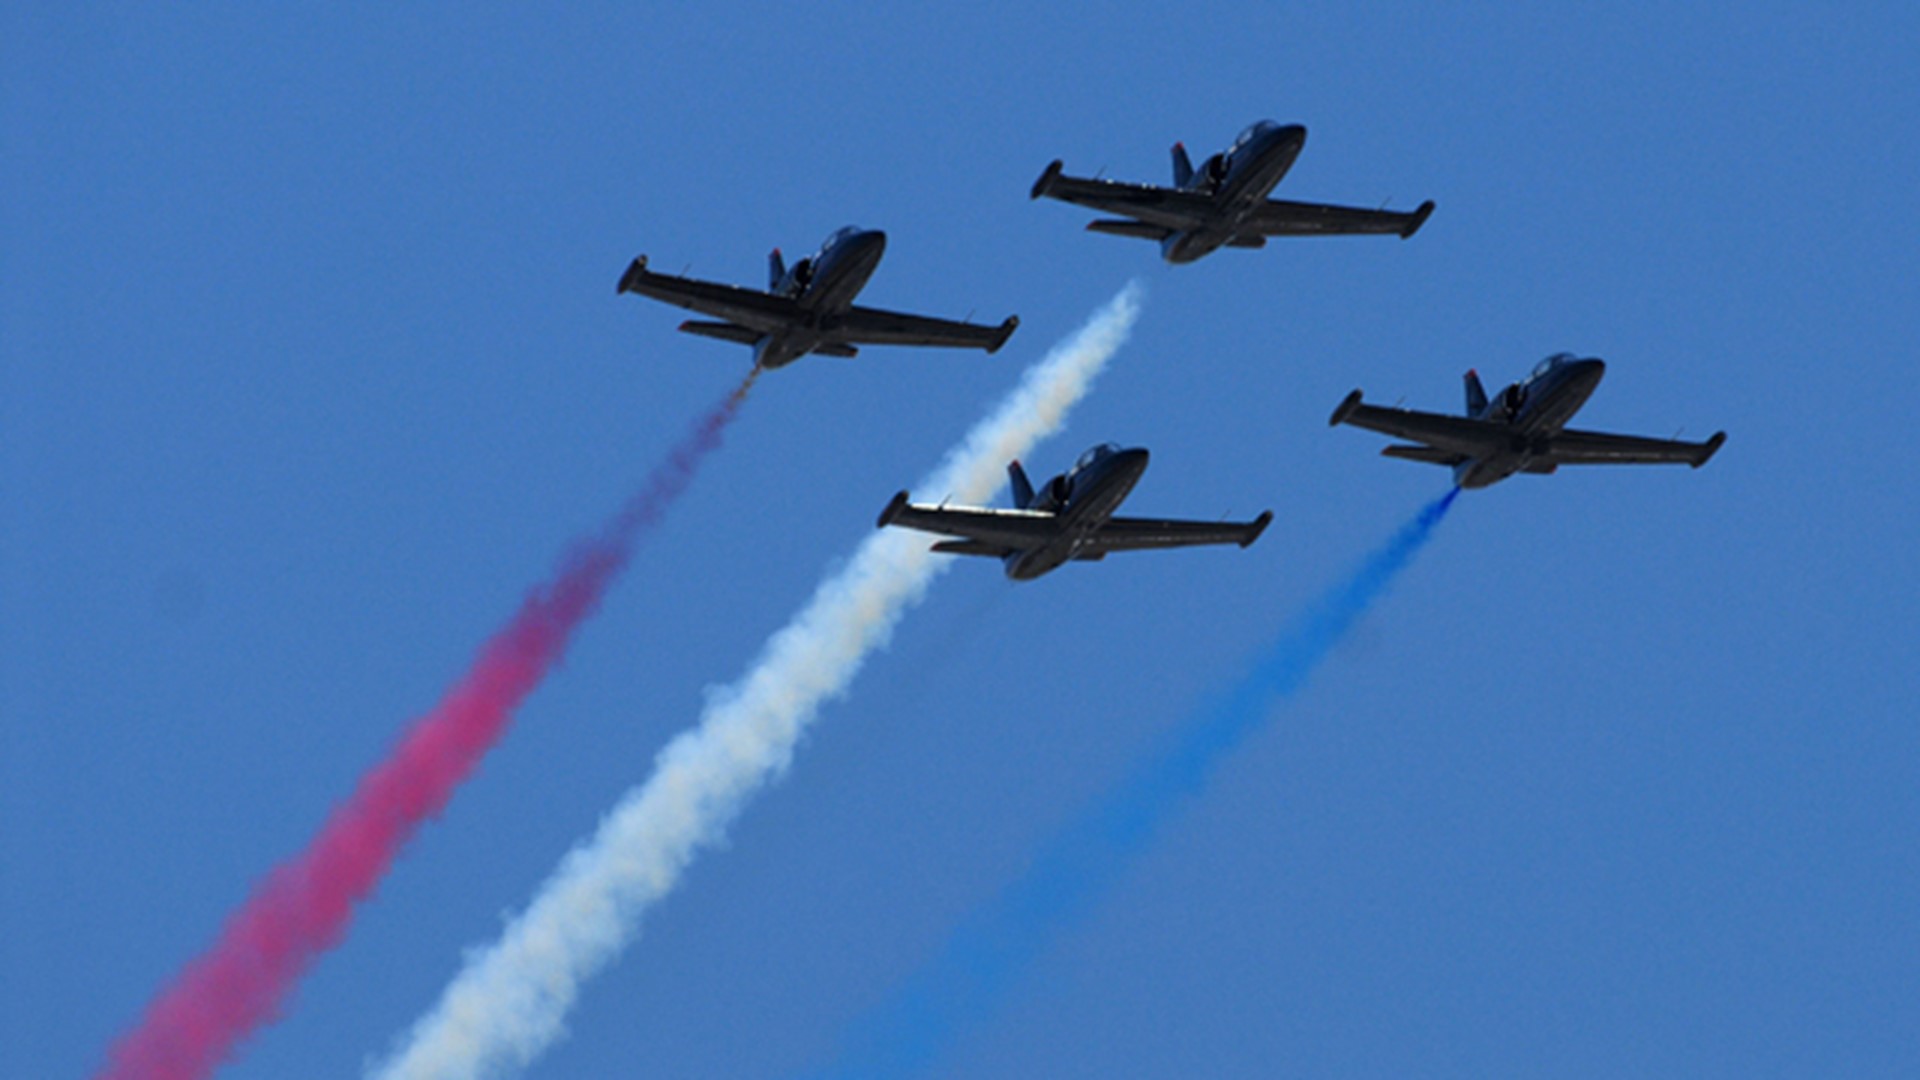 I90 bridge closures this weekend for Seafair show